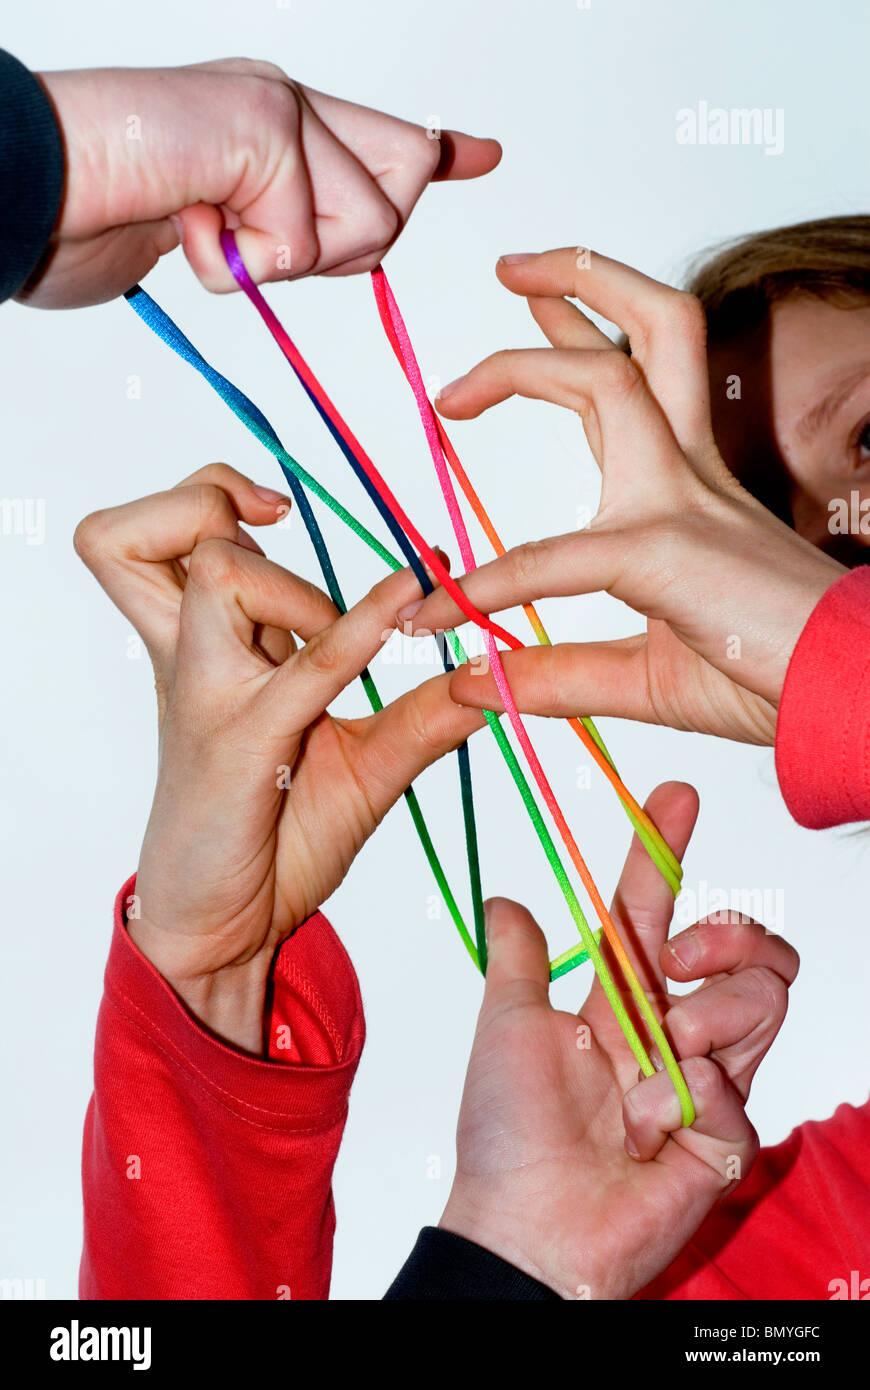 Hands of 2 girls playing fingertwist with a coulored rope. Stock Photo